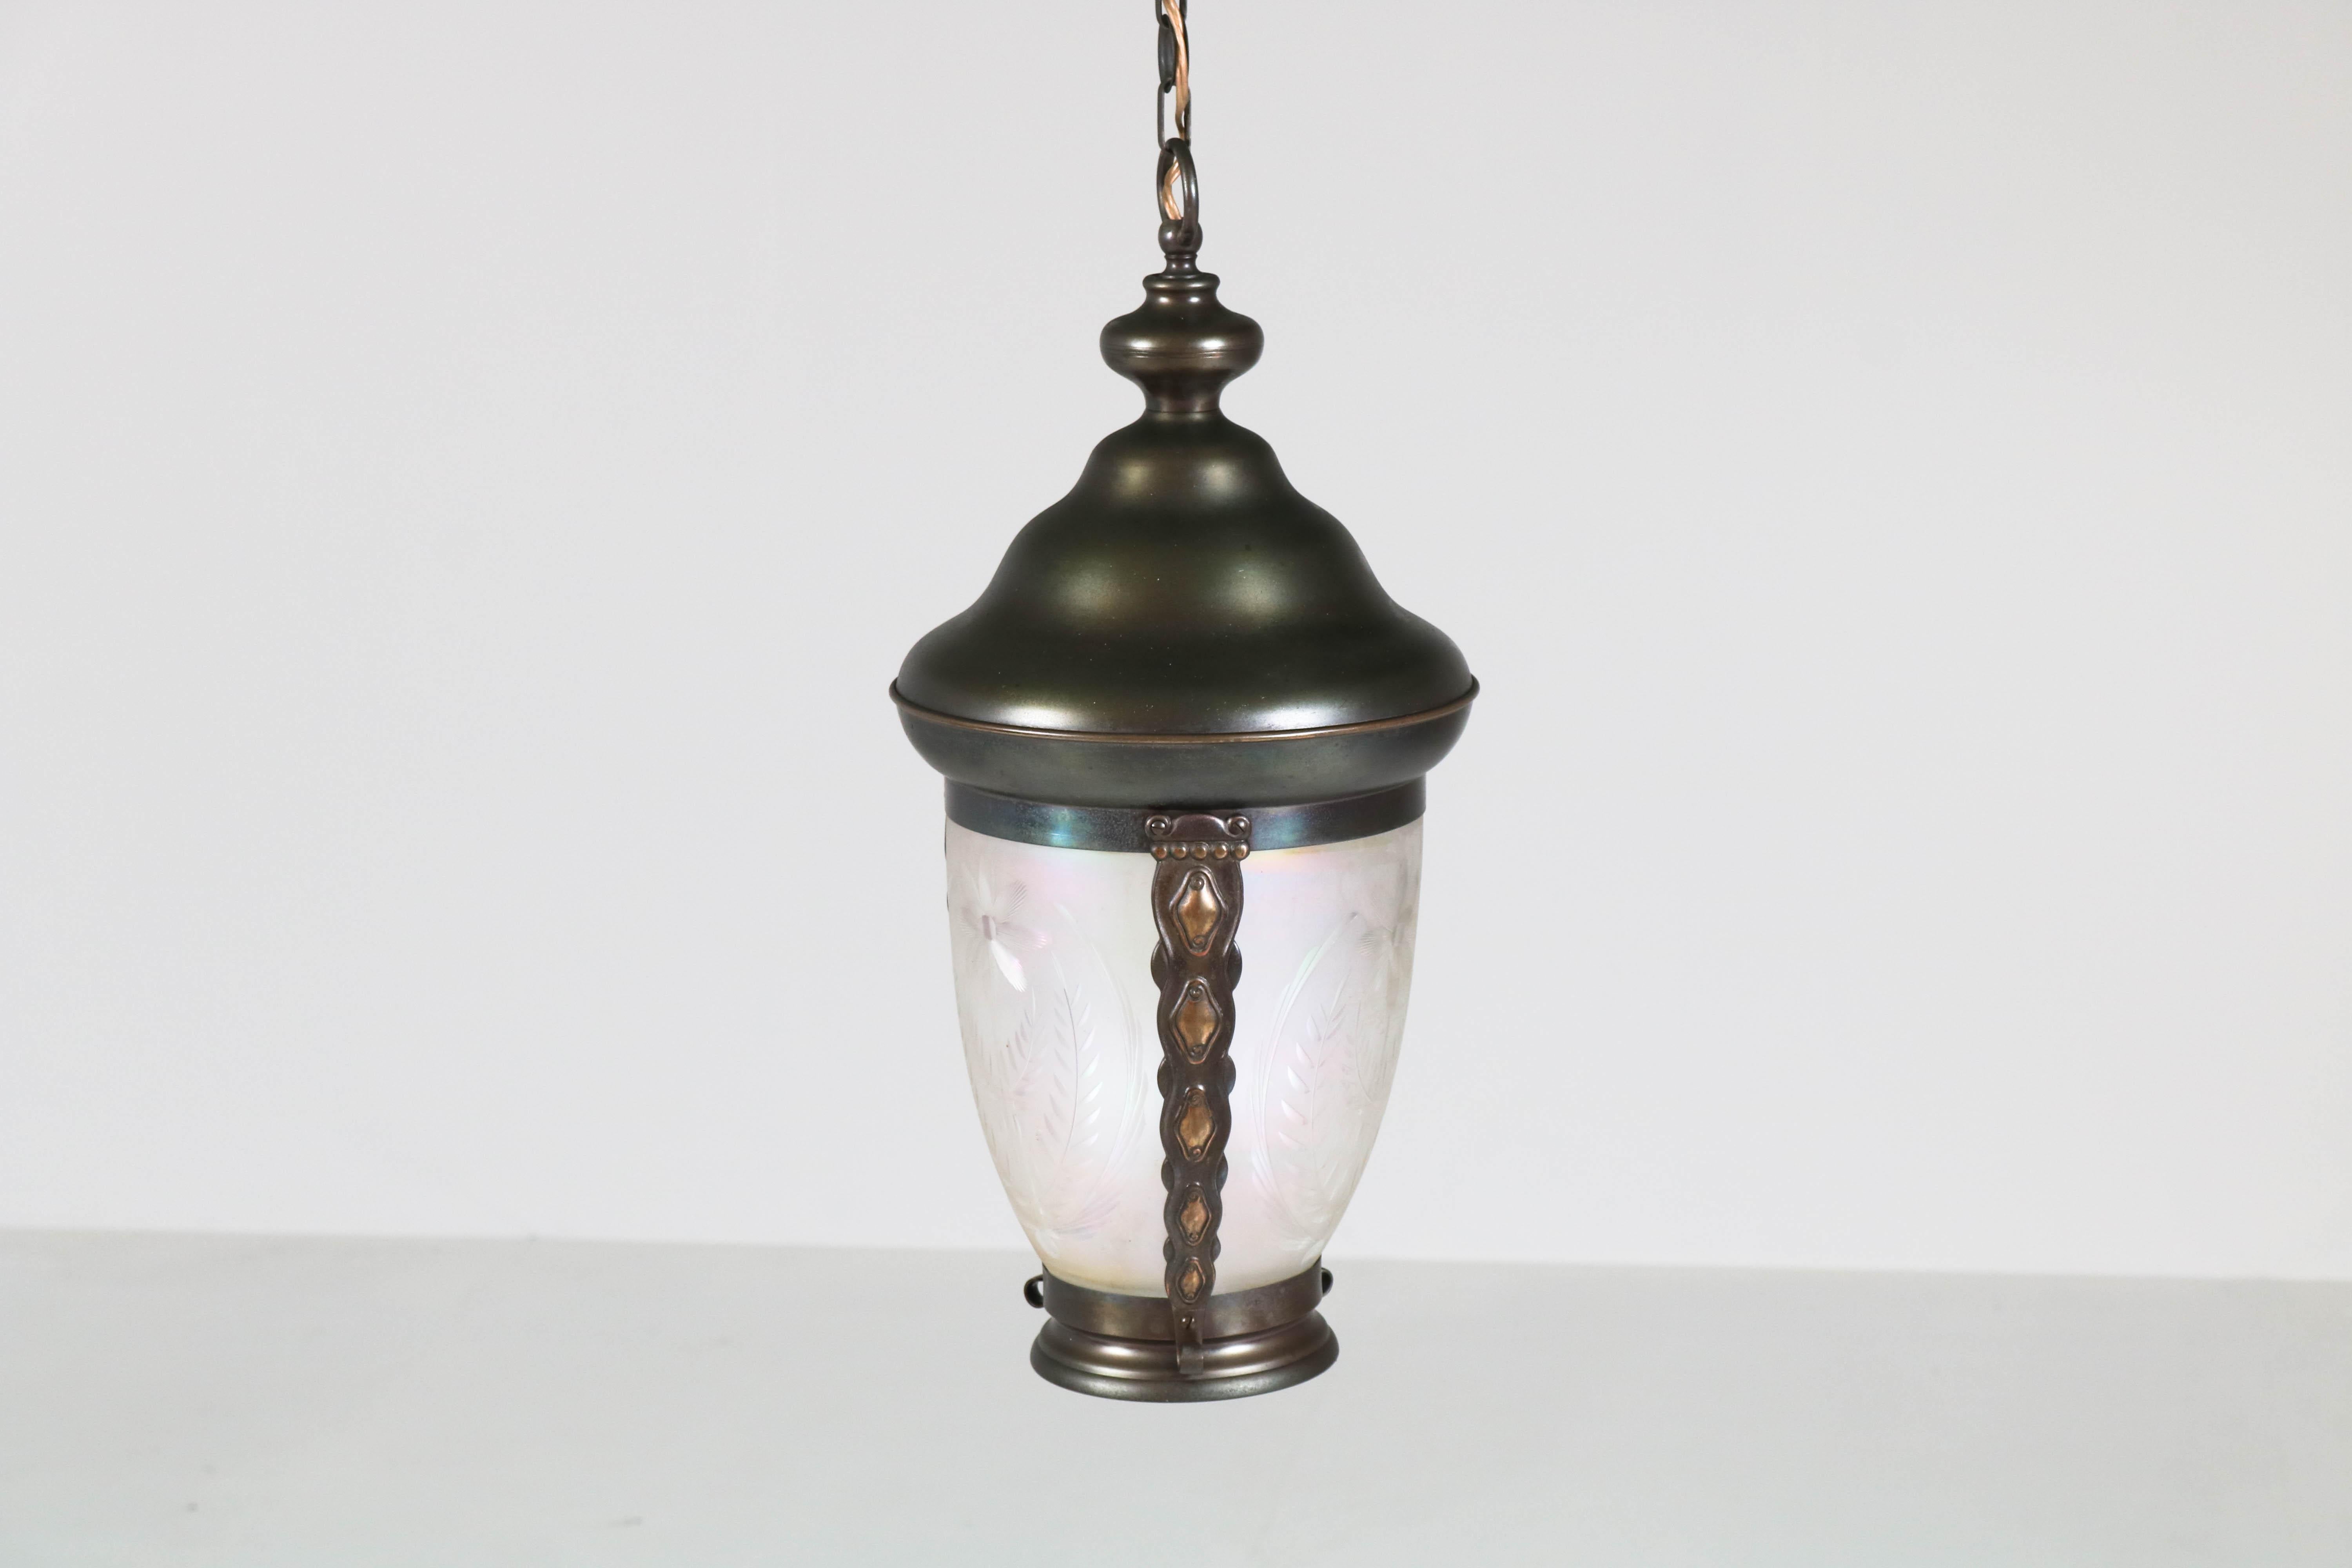 Brass Art Nouveau Lantern or Pendant Lamp with Petrol Glass Shade, 1900s For Sale 3